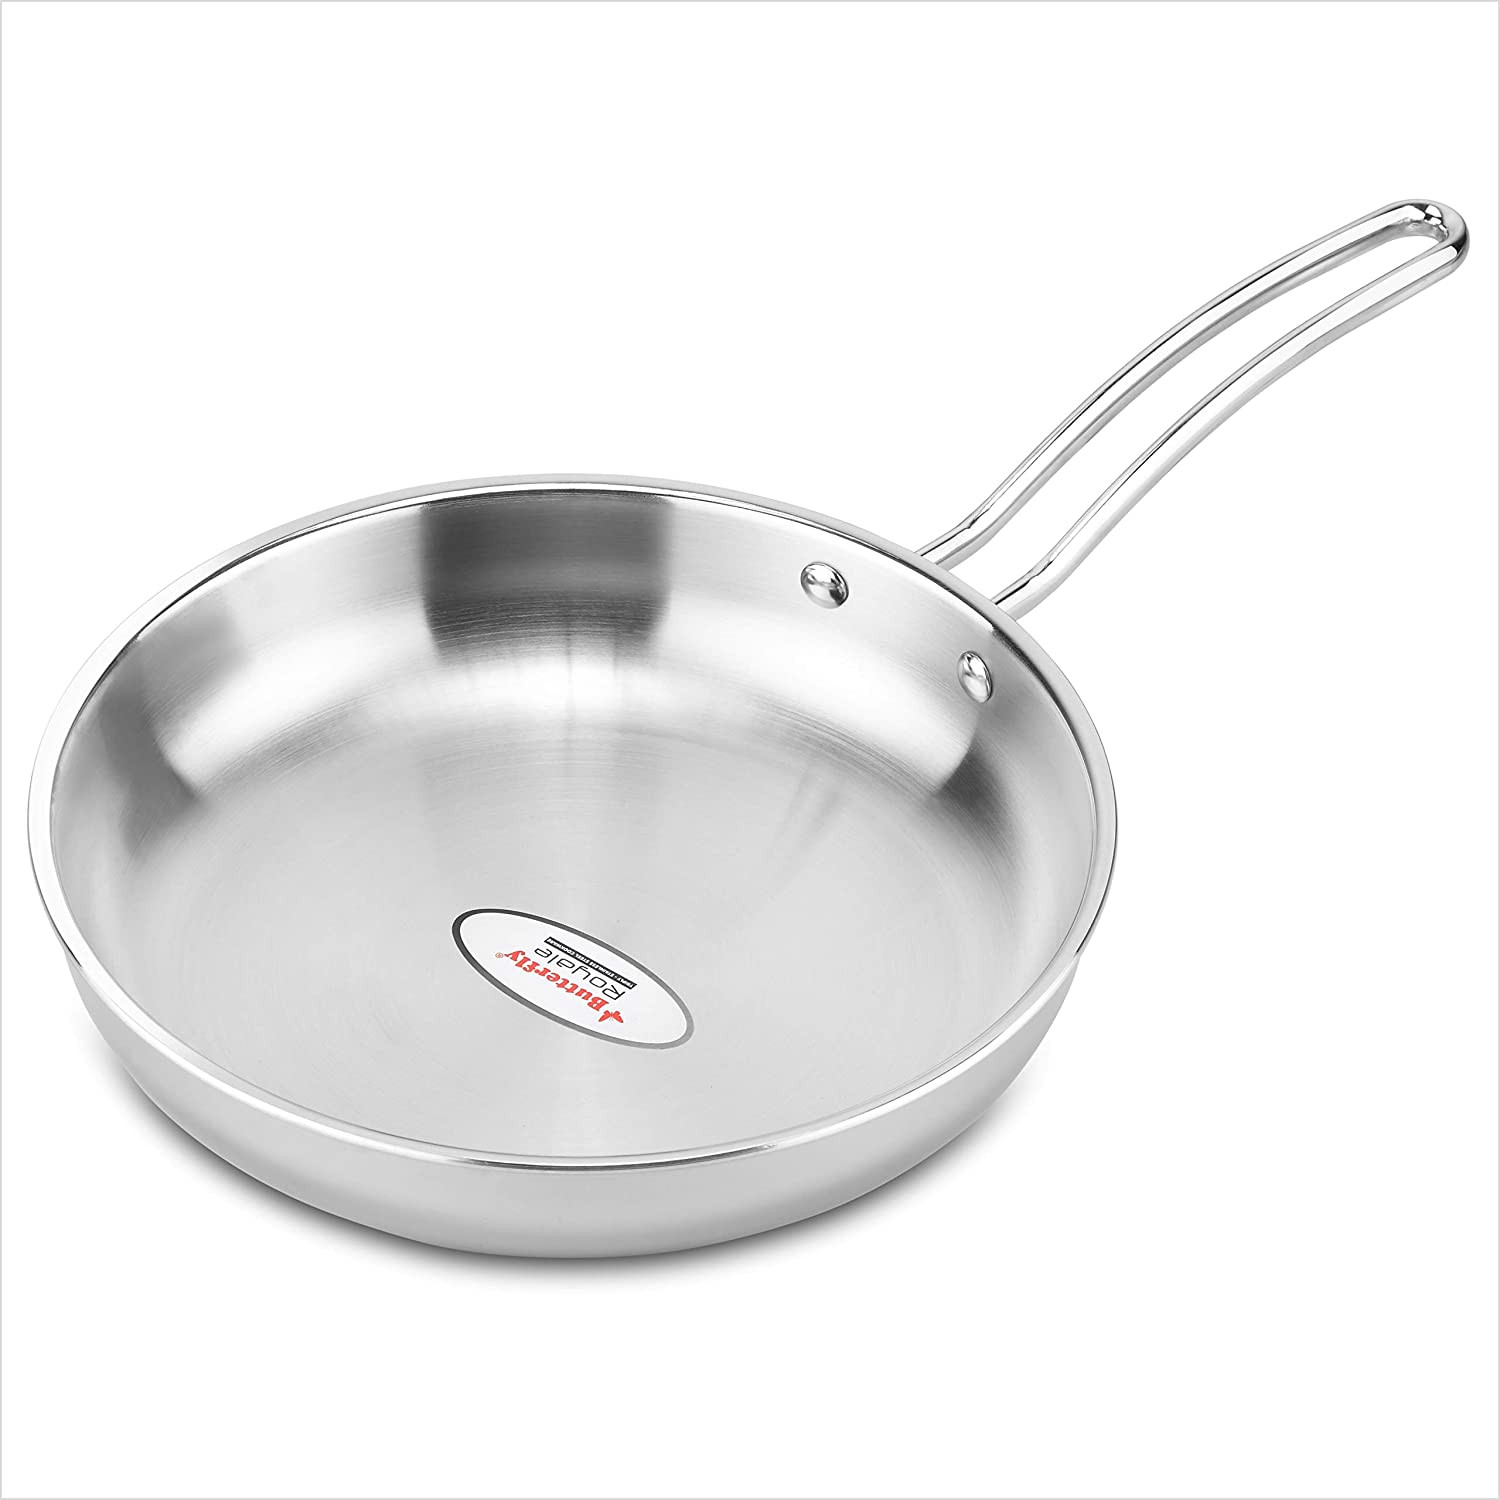 butterfly-chefs-classic-stainless-13-inch-open-skillet-with-helper-handle